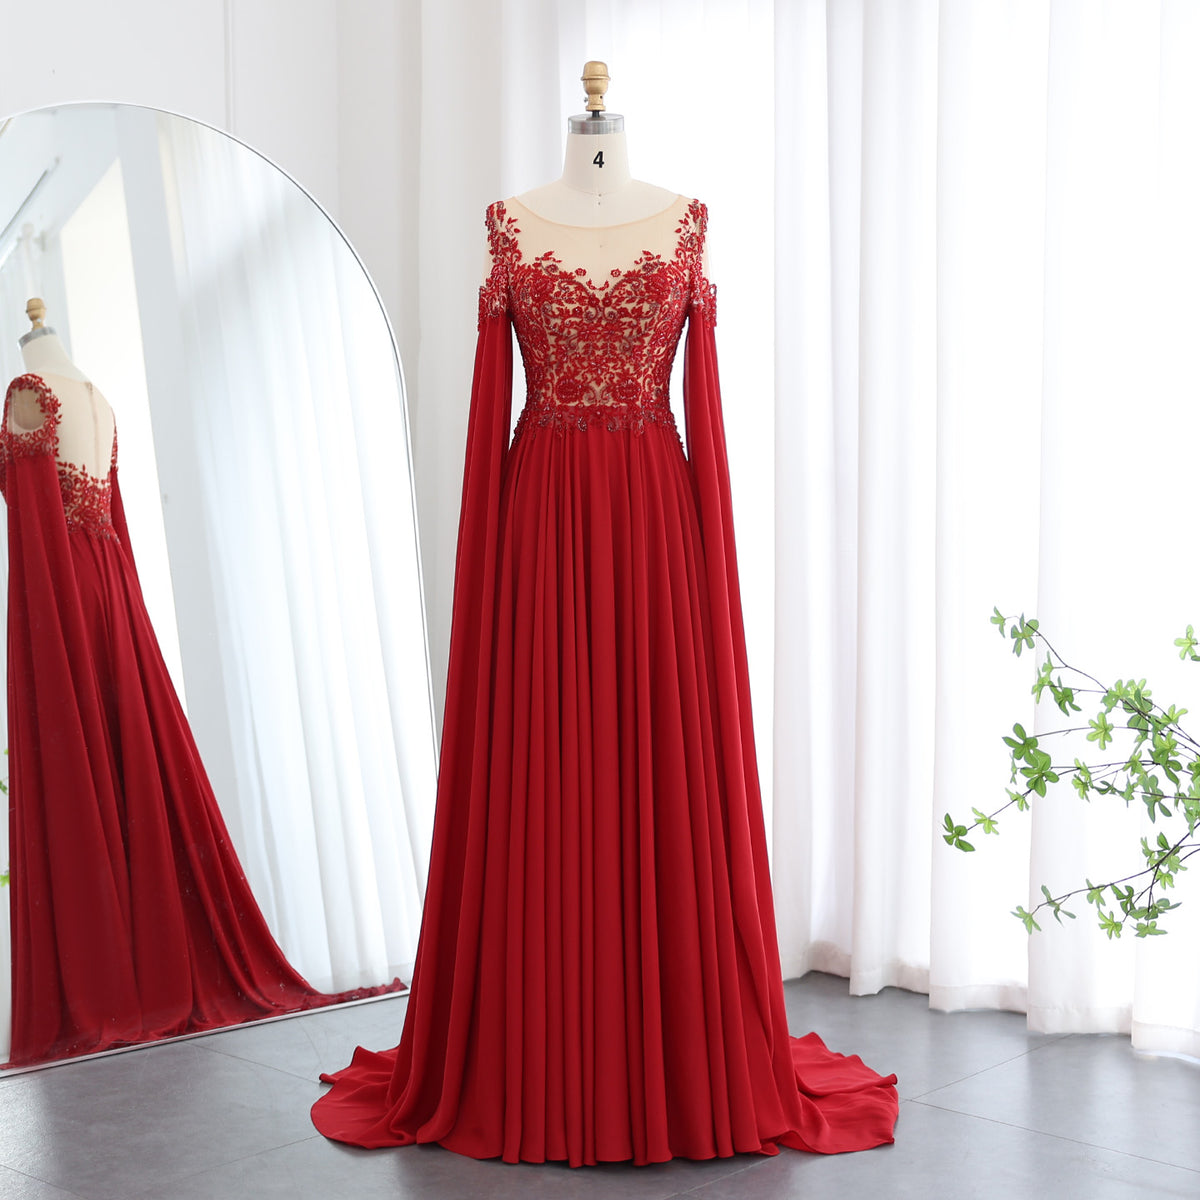 Sharon Said Luxury Beaded Wine Red Chiffon Evening Dress with Cape Sleeve Women for Wedding Dubai Formal Party Gowns SS298